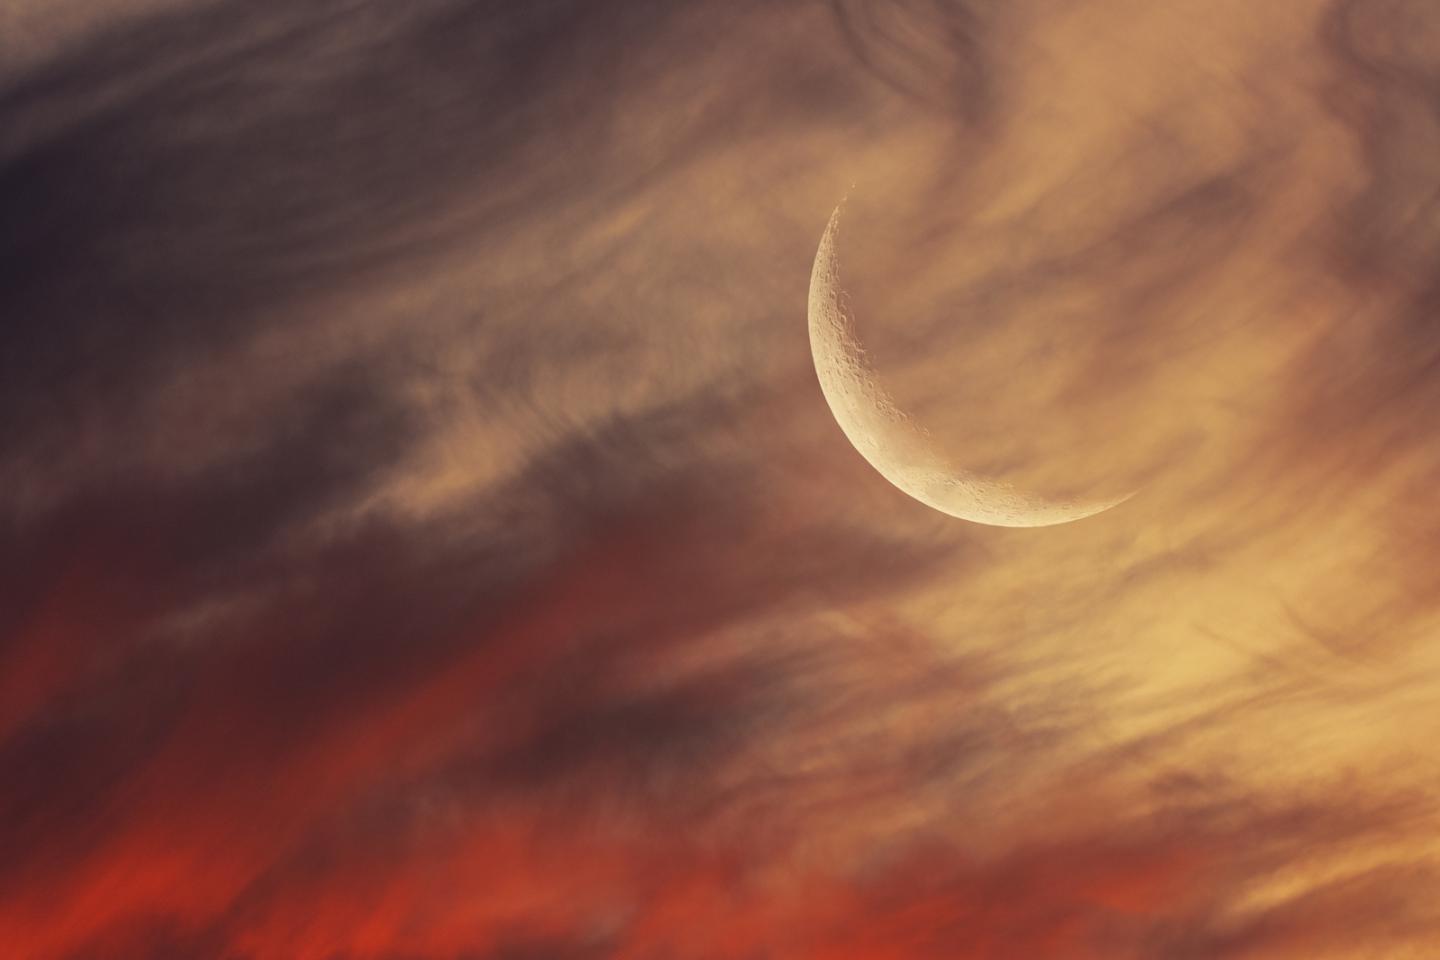 Crescent Moon in a red and cream cloudy sky